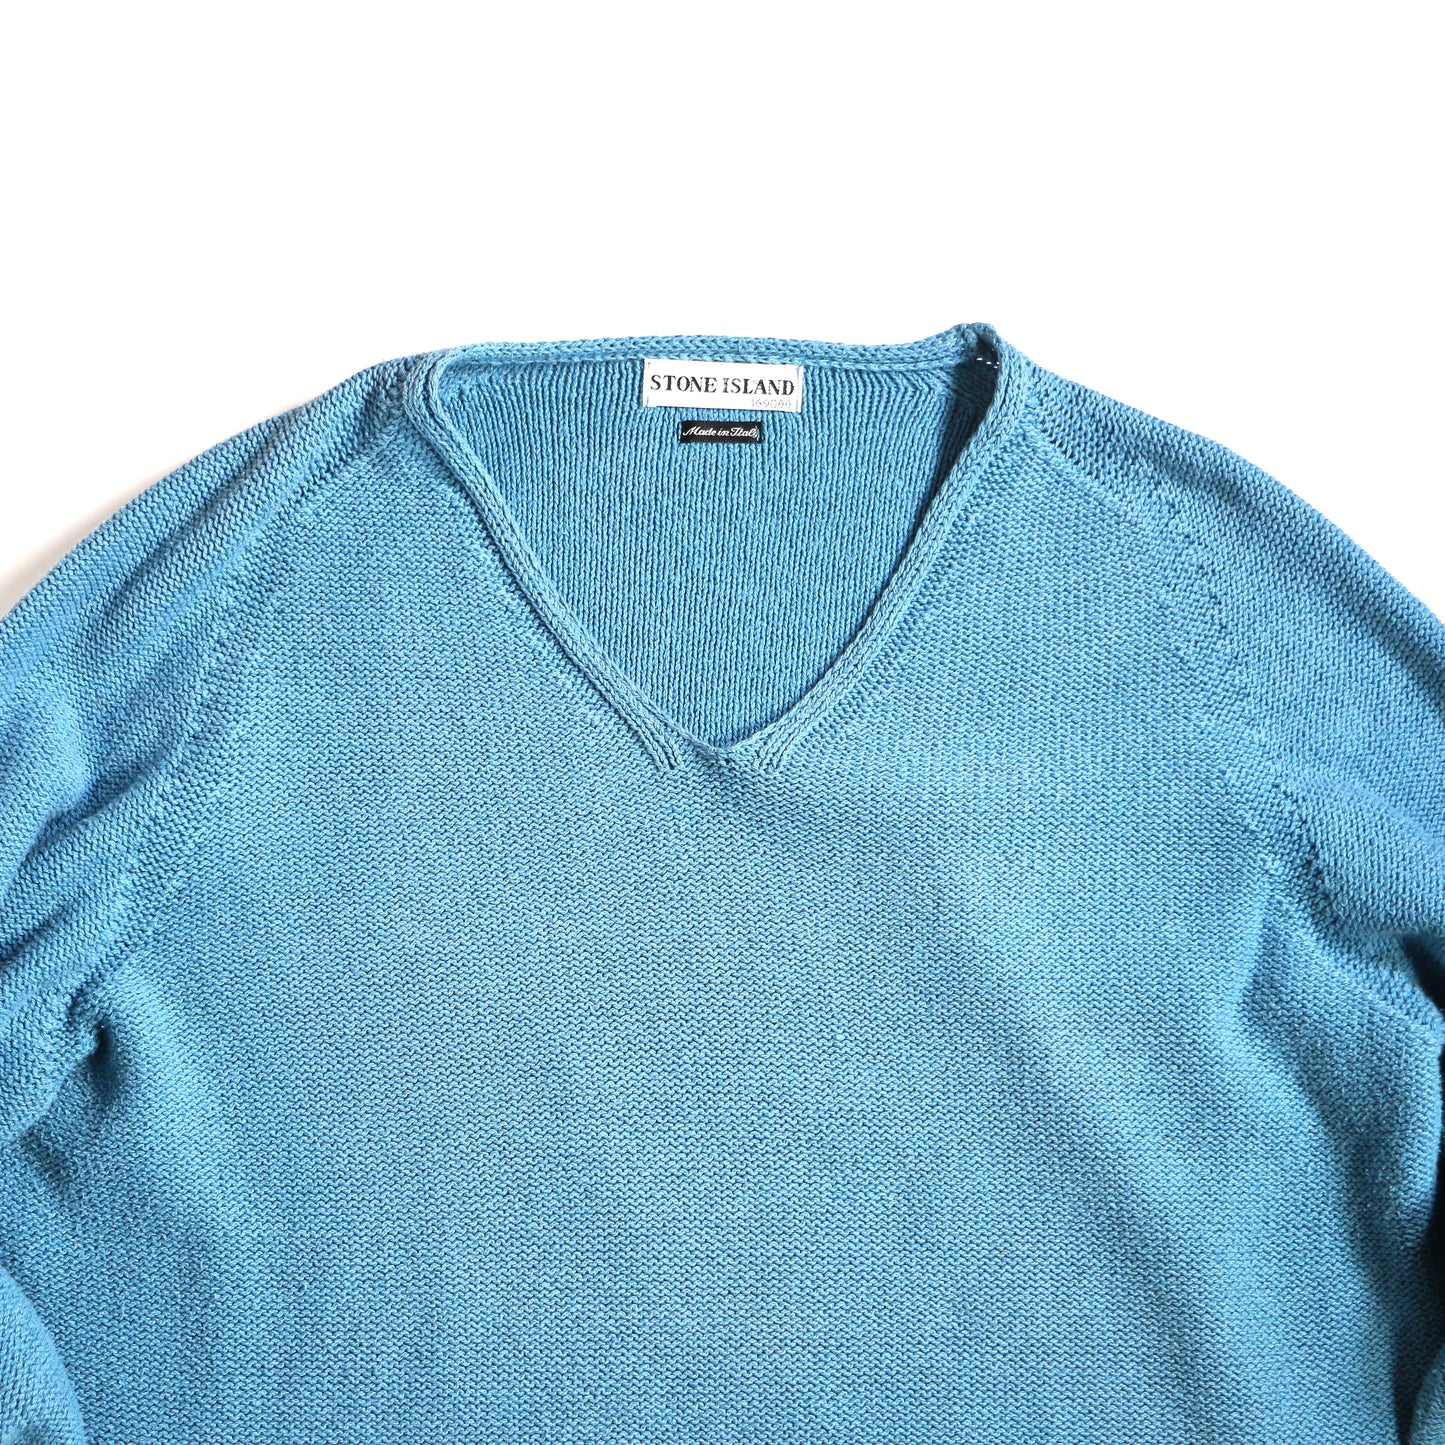 VINTAGE STONE ISLAND 2001SS V-NECK SWEATER made in Italy / BLUE